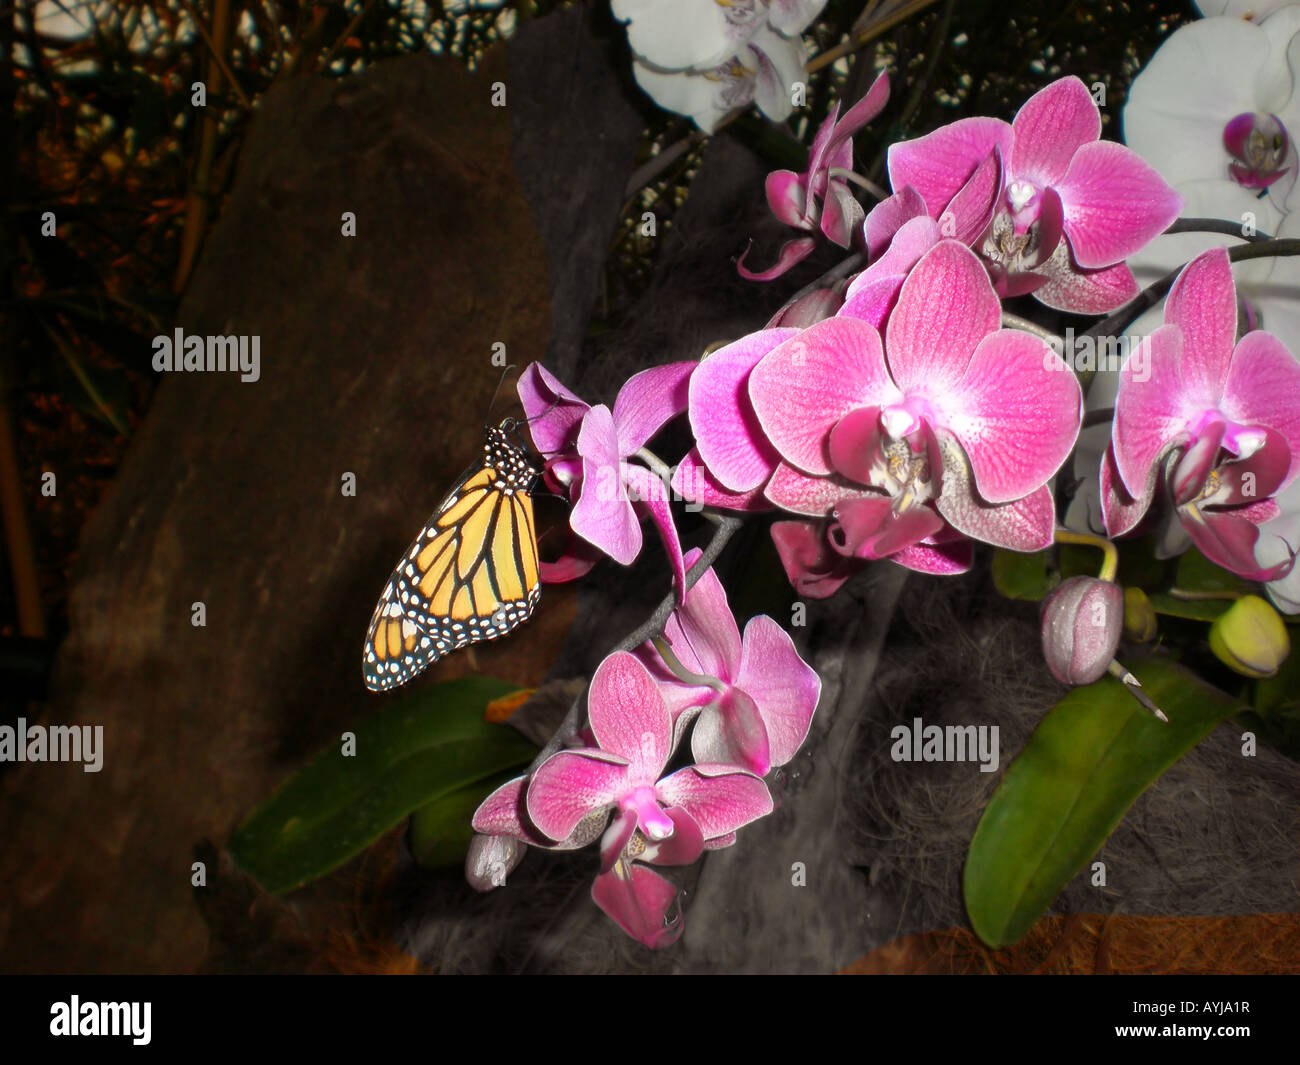 Monarch butterfly and Paphiopedilum orchid 329 Stock Photo